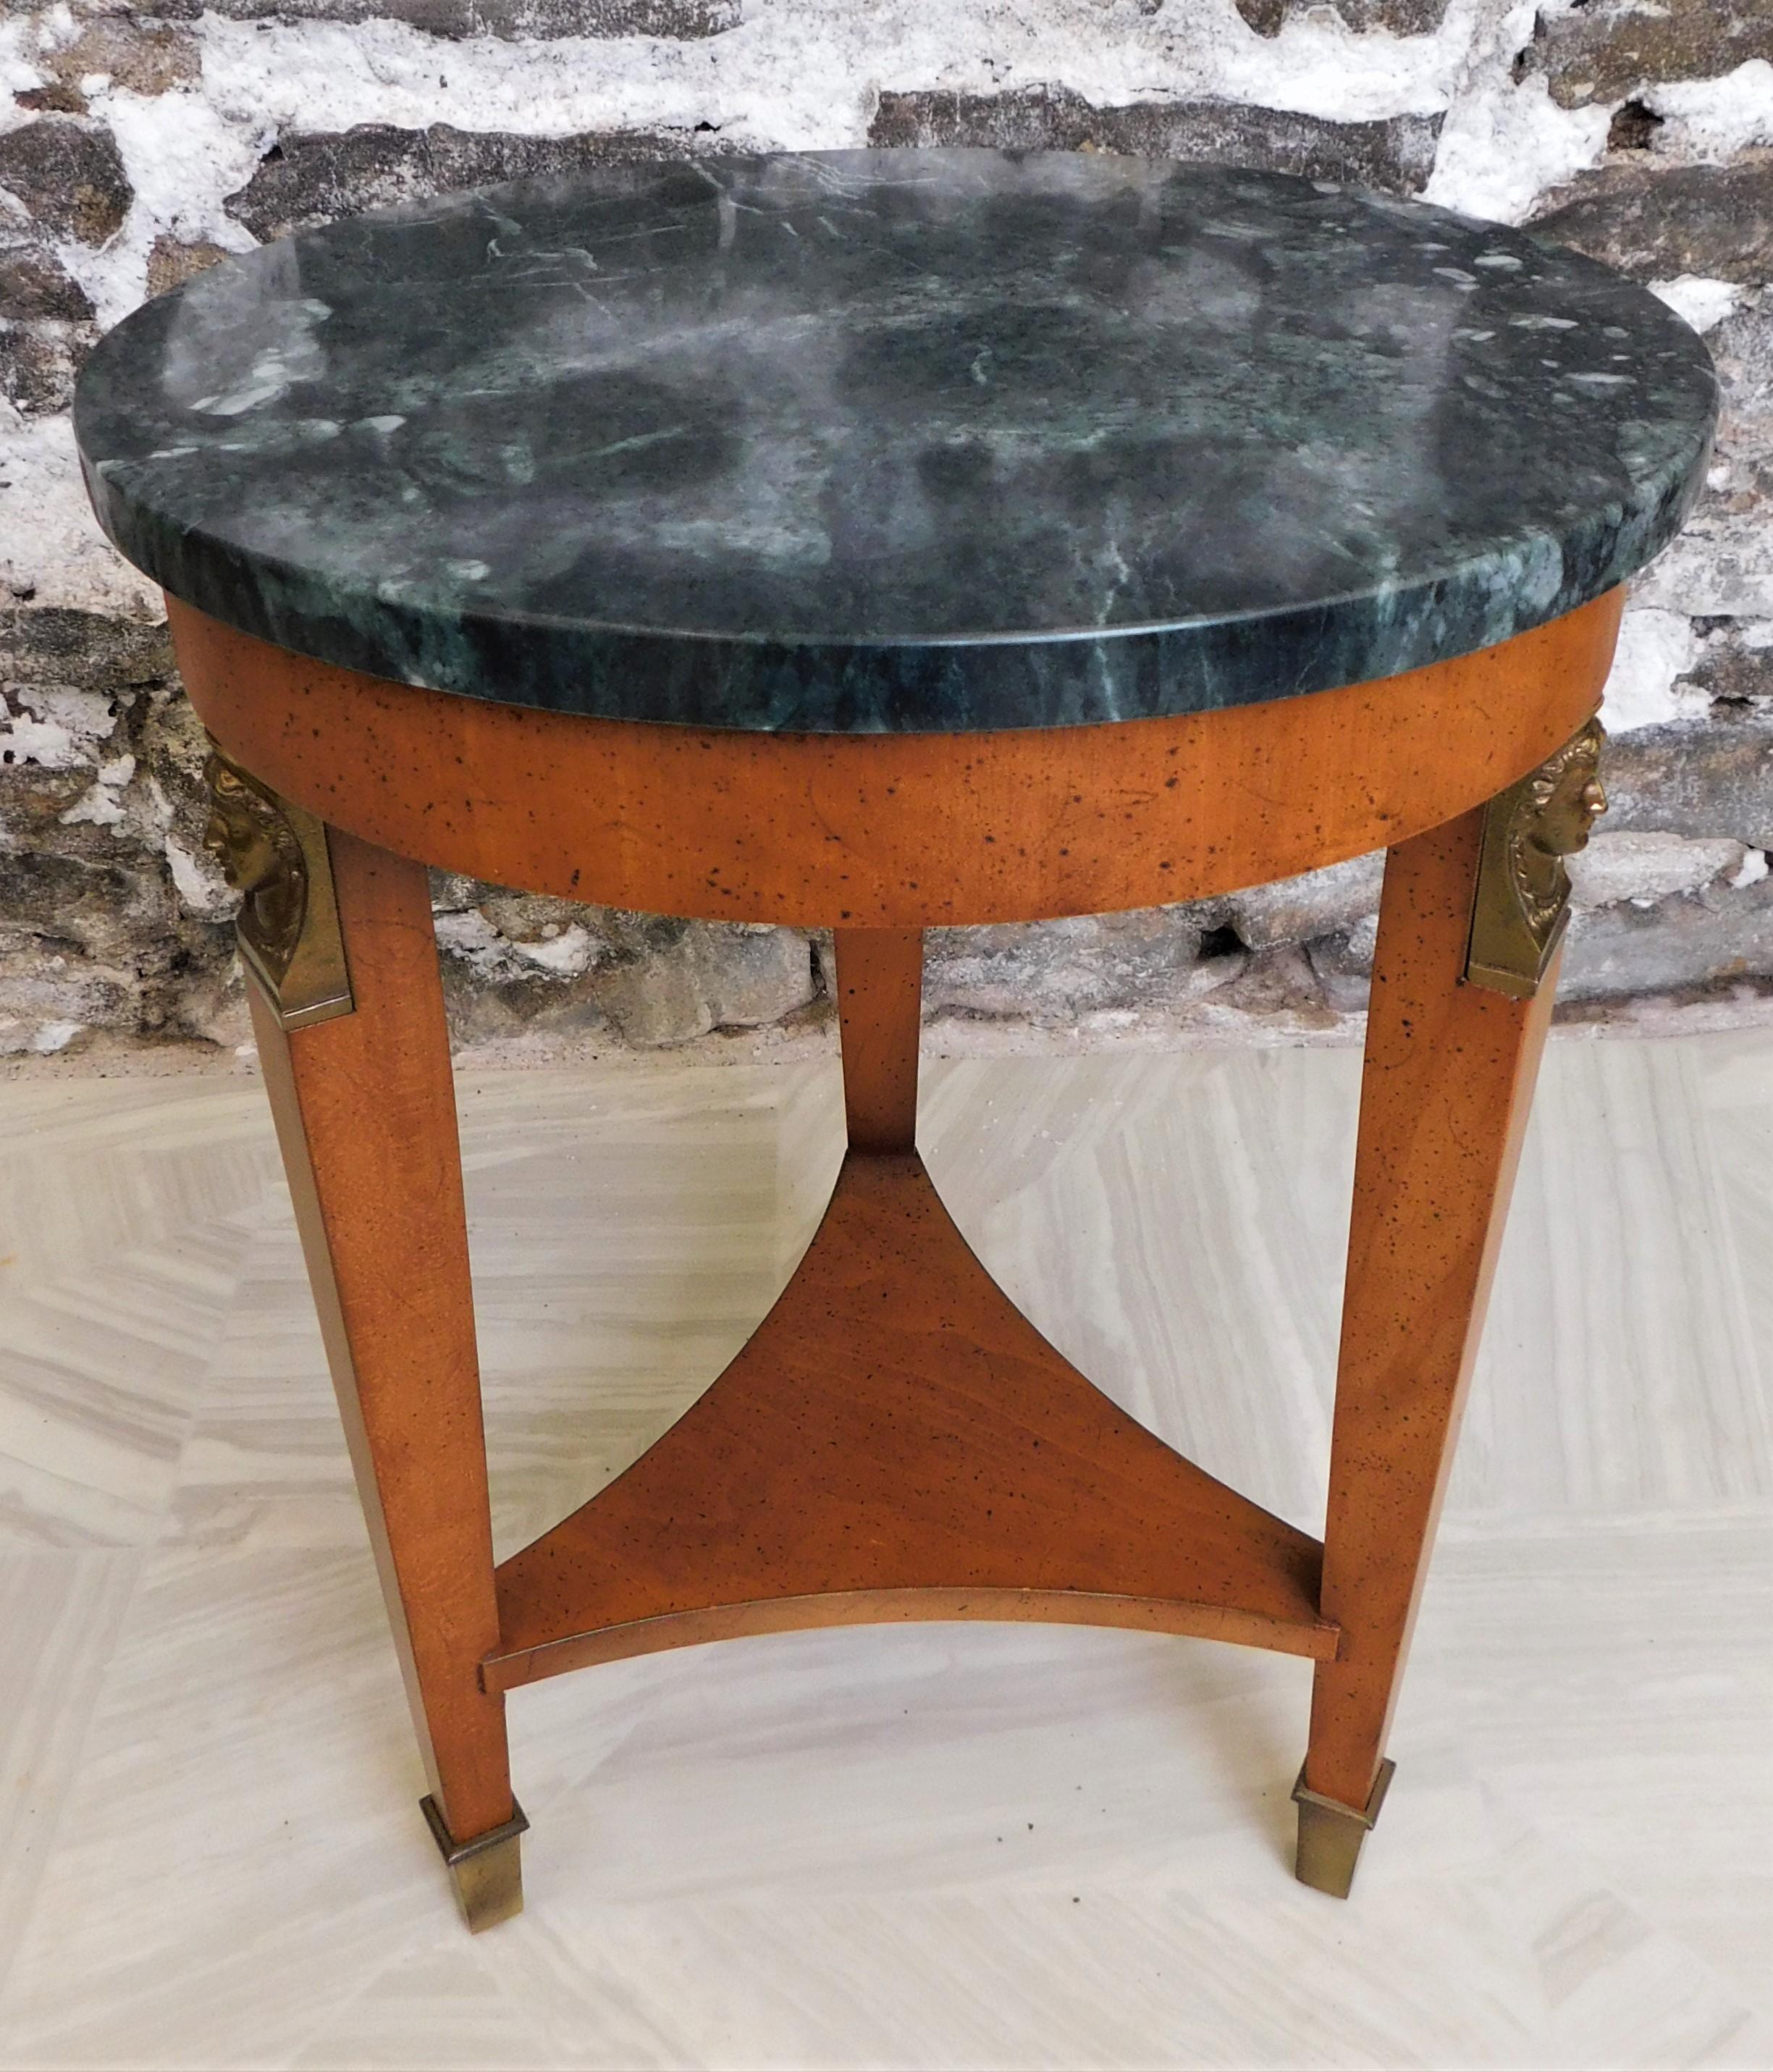 Beautiful 1950's Henredon fine furniture side or end table with brass capped feet on three legs and three brass figurative women's heads on top of legs and a made in Italy marble top. Nice Neoclassical or Empire styling.